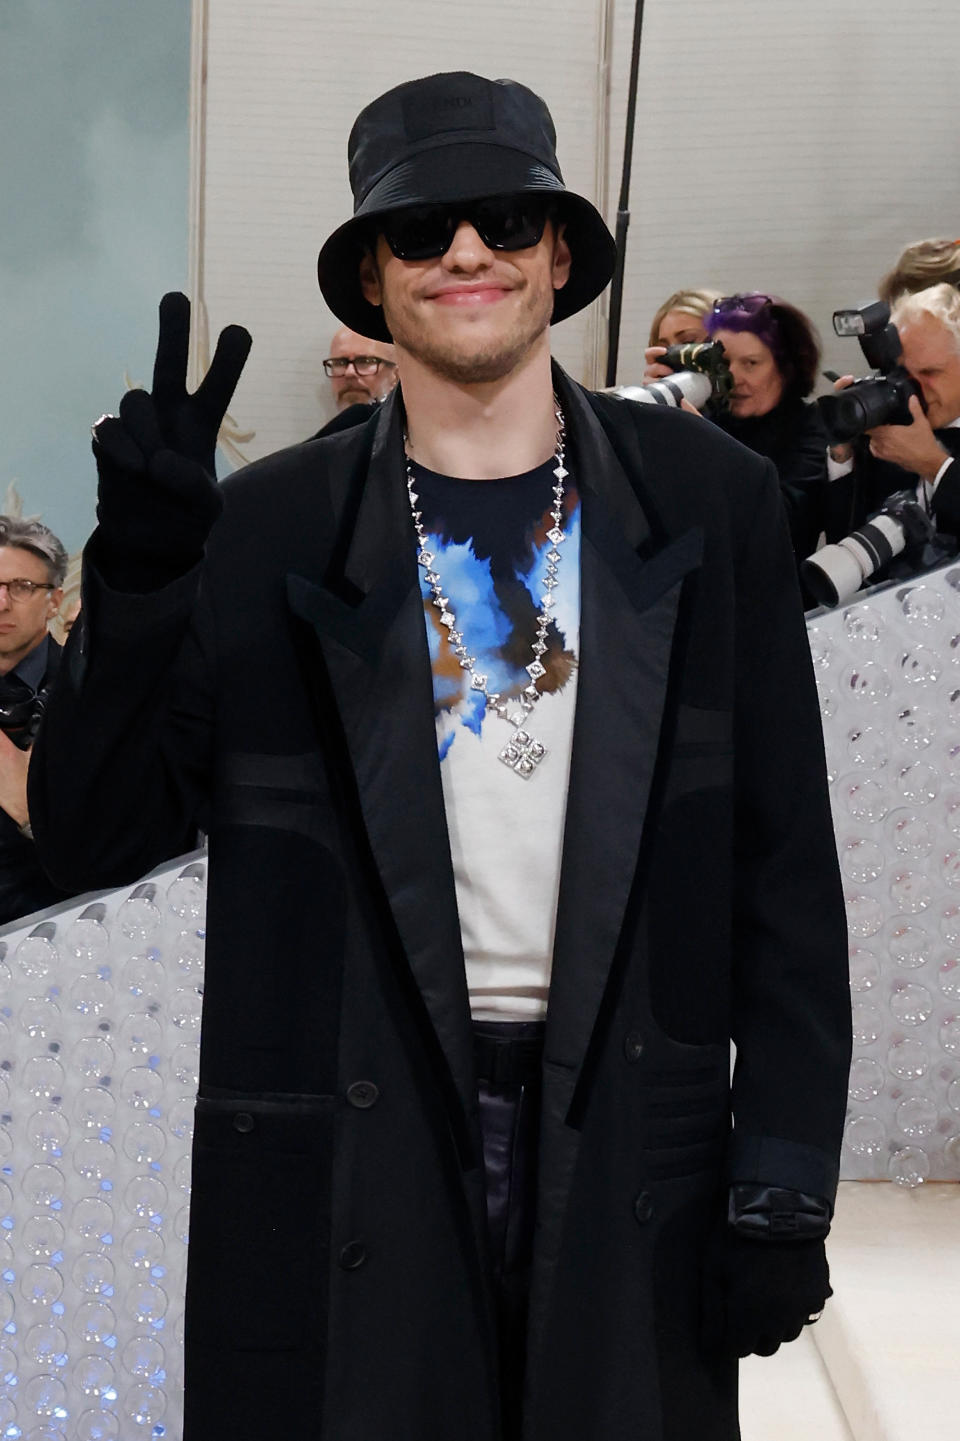 Pete giving the peace sign as he stands at a red carpet event. He's wearing a long coat, gloves, bucket hat, sunglasses, and a chain